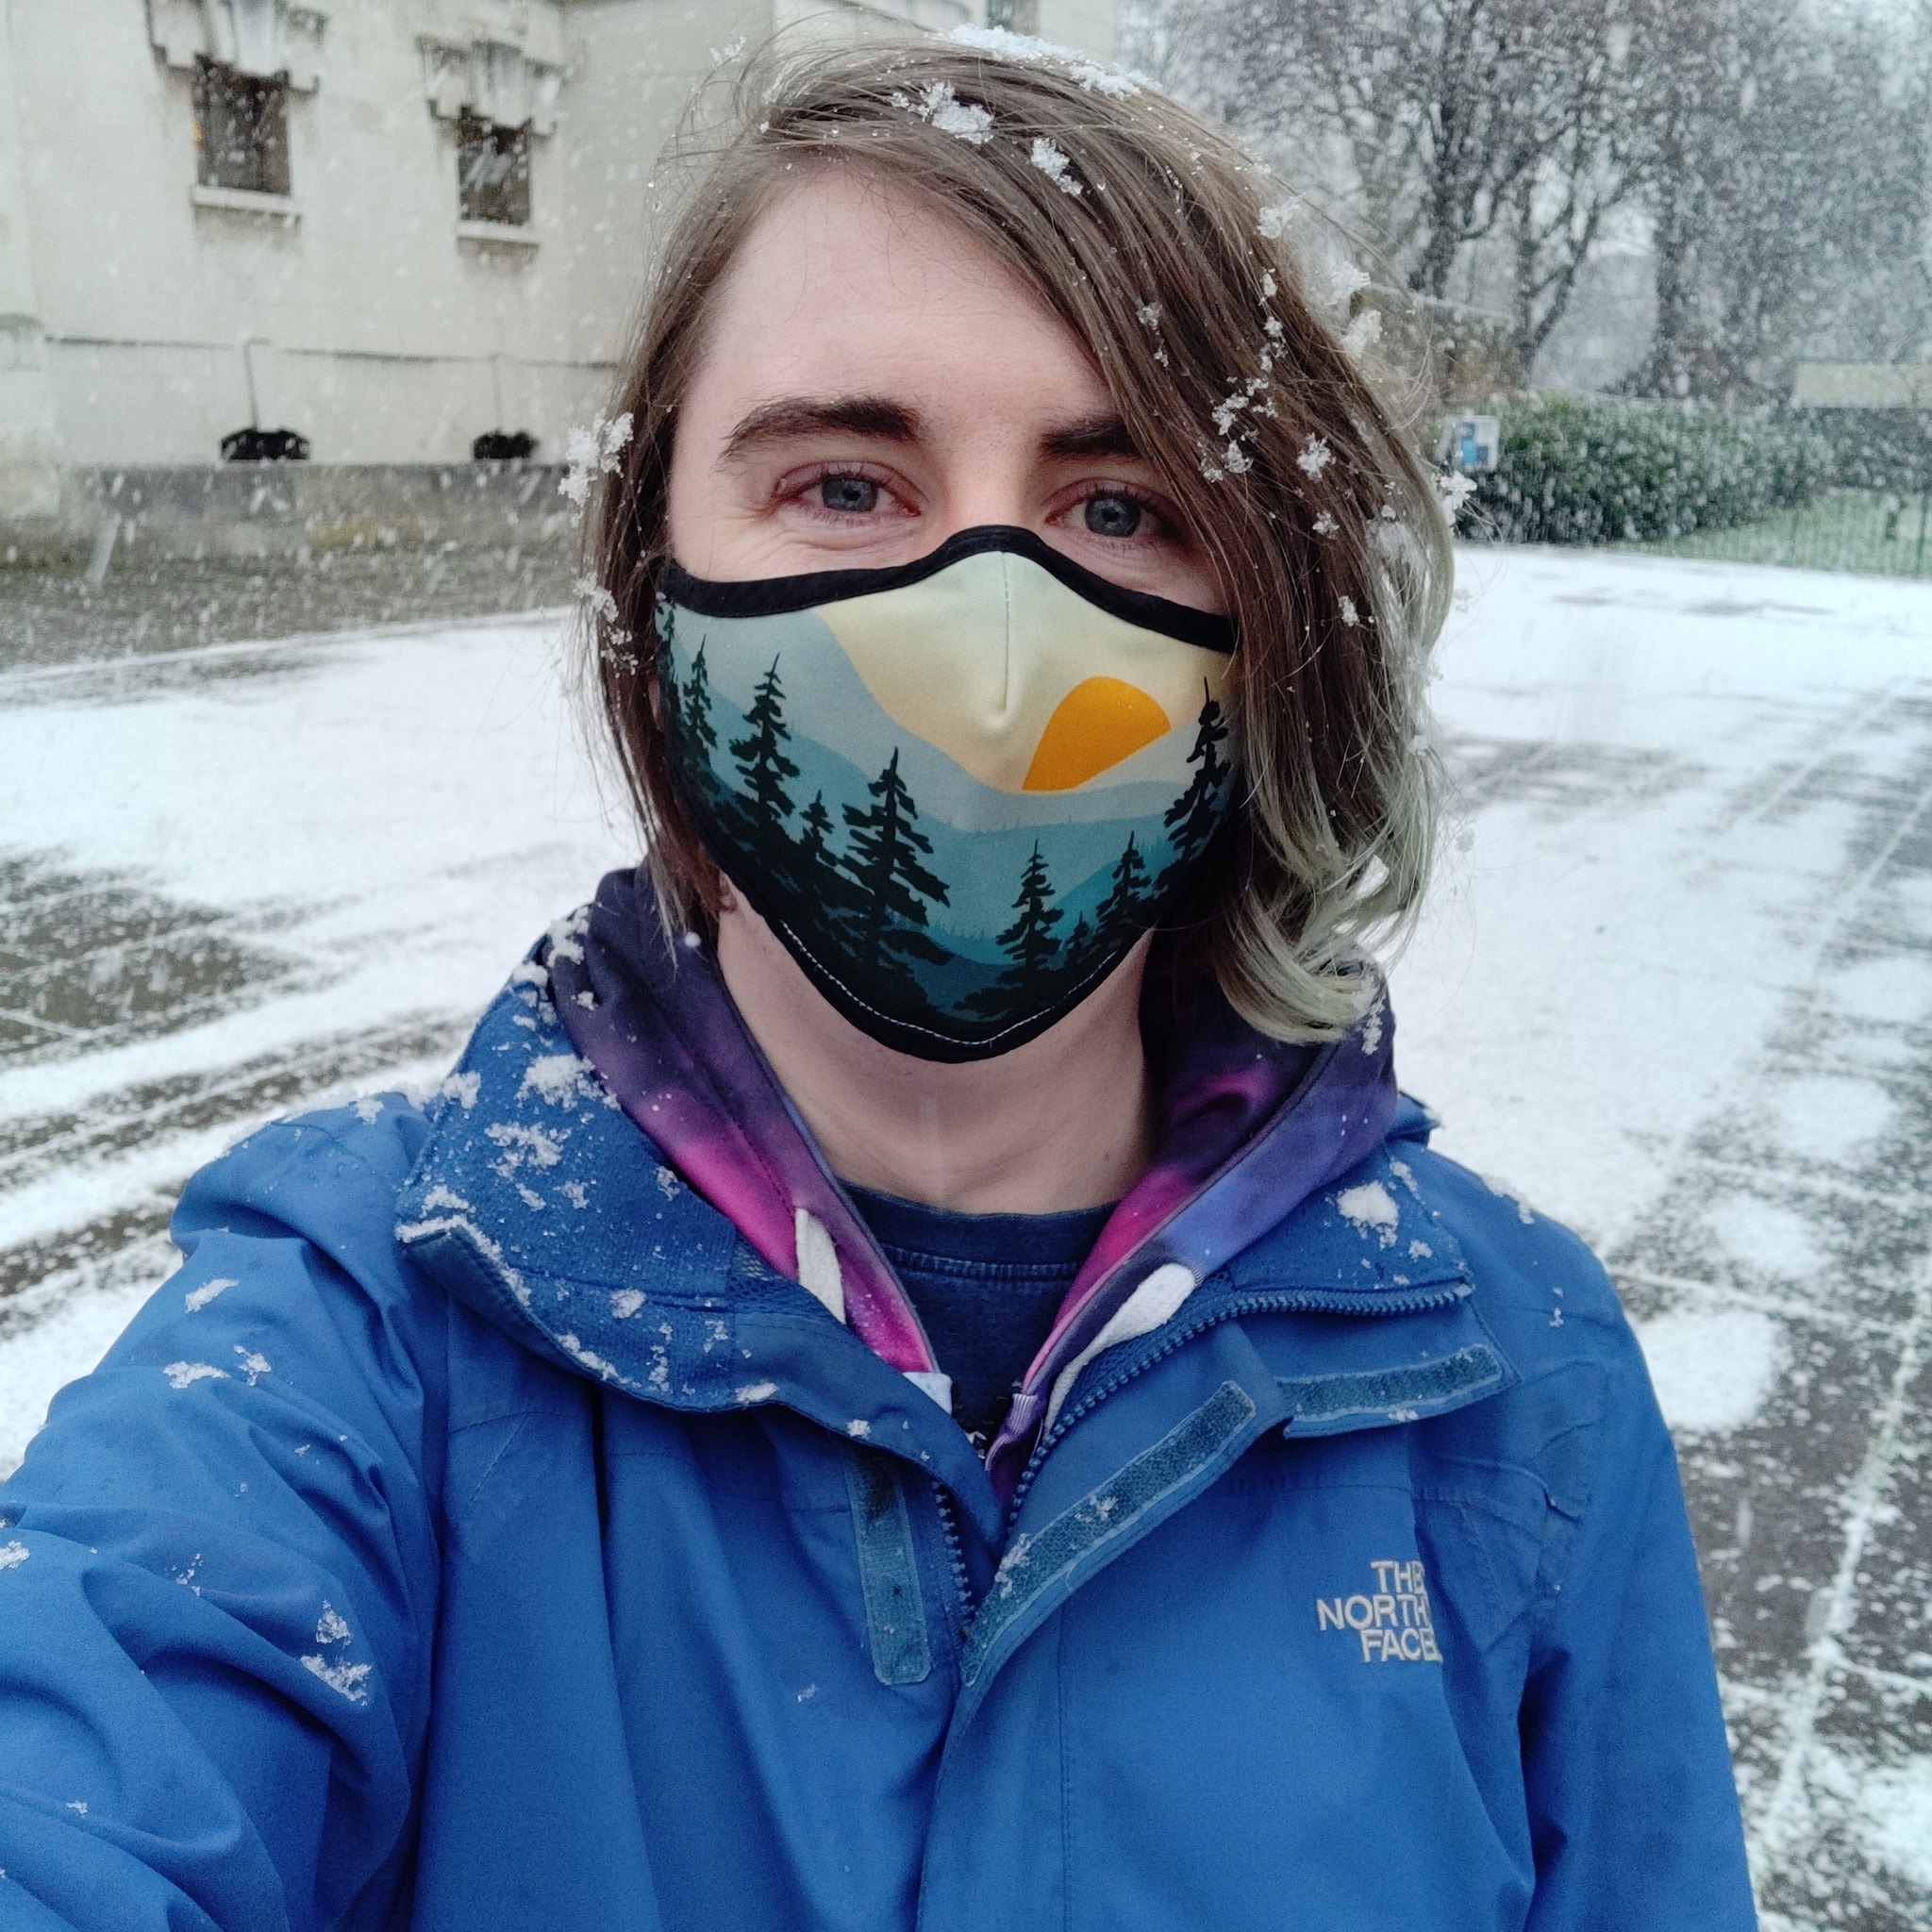 A selfie, outdoors. I’m wearing a blue winter jacket, with a
                   hoodie underneath, and a cloth face mask with a
                   tree-and-sunset pattern in block colours. There is snow in my
                   hair and on my jacket, as well as on the stone floor behind
                   me. More falls in the distance.